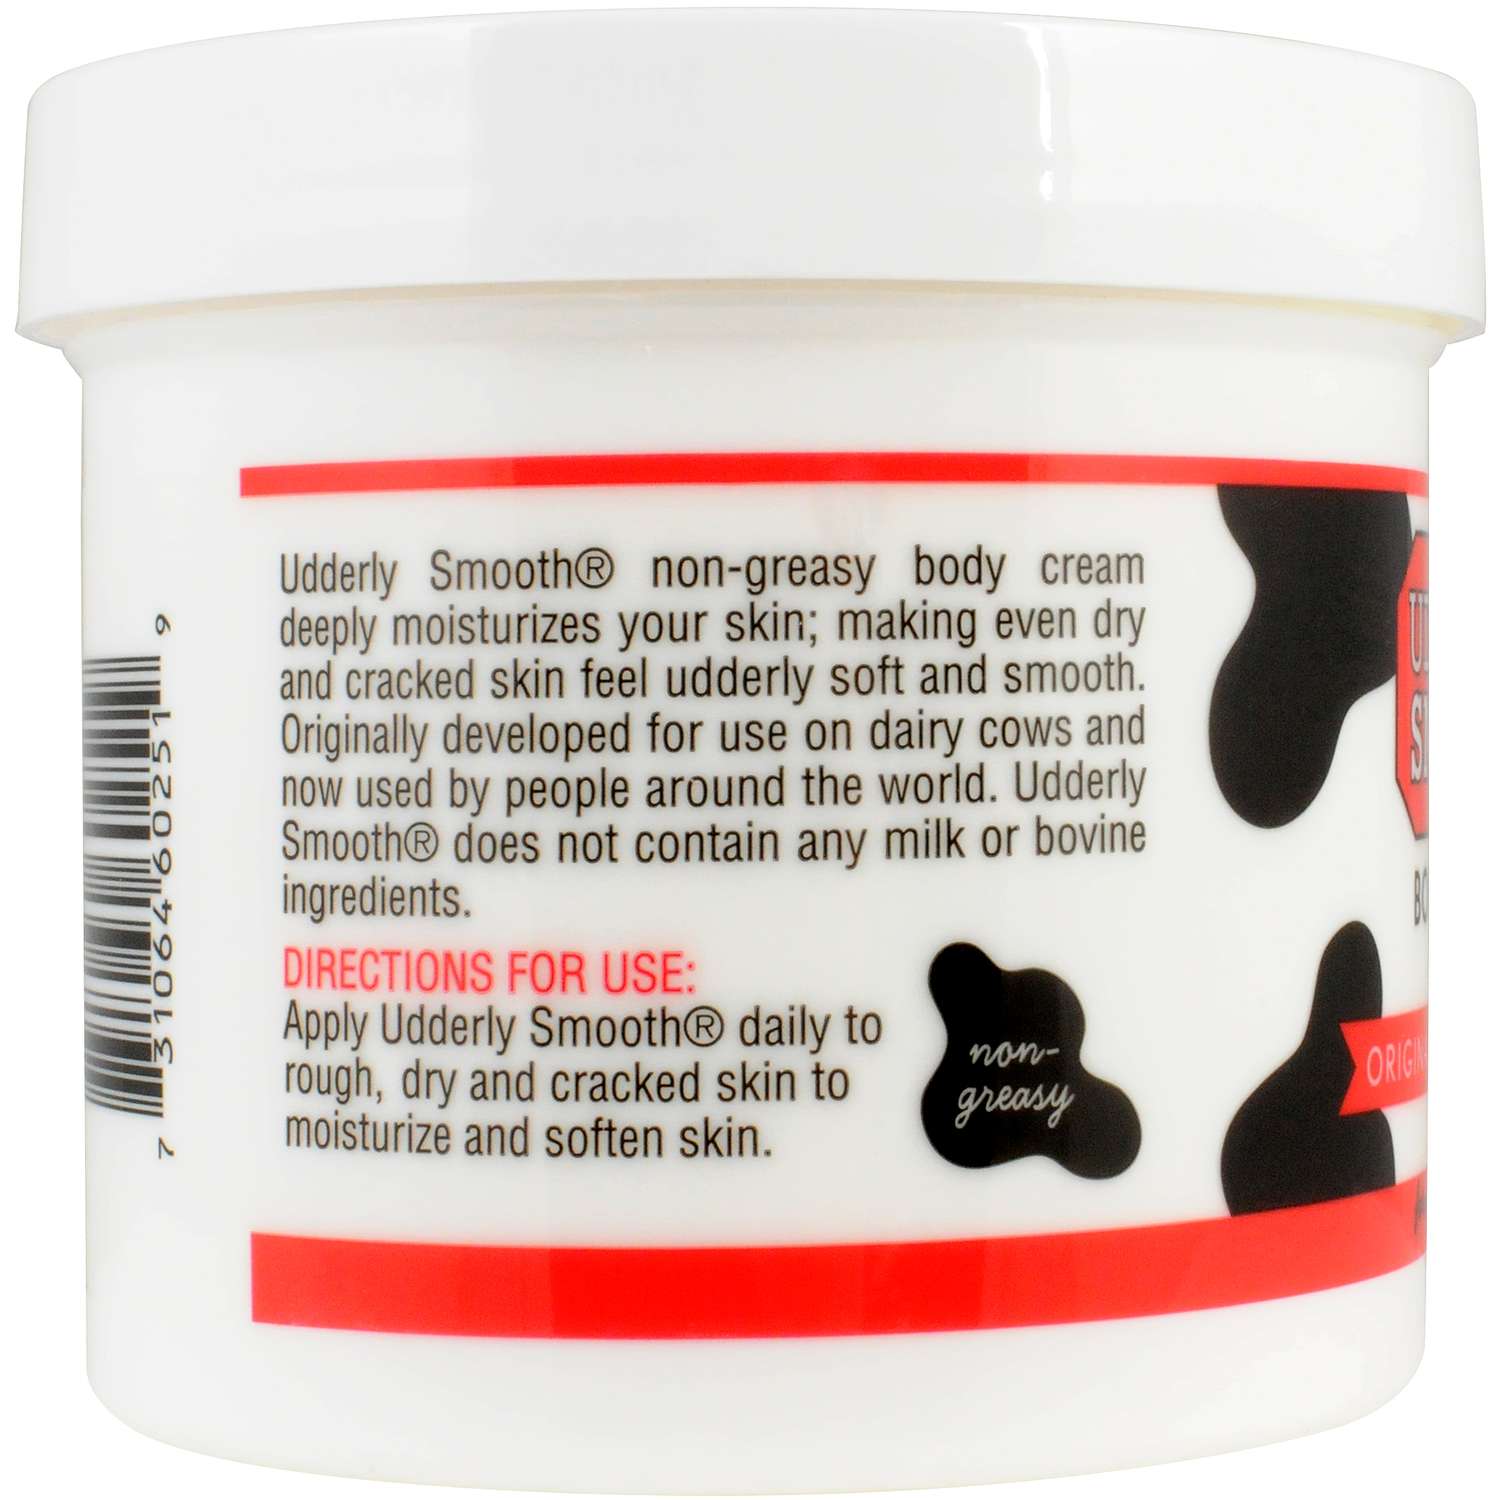 Udderly Smooth Lightly Scented Scent Body Cream 10 oz 1 pk - Ace